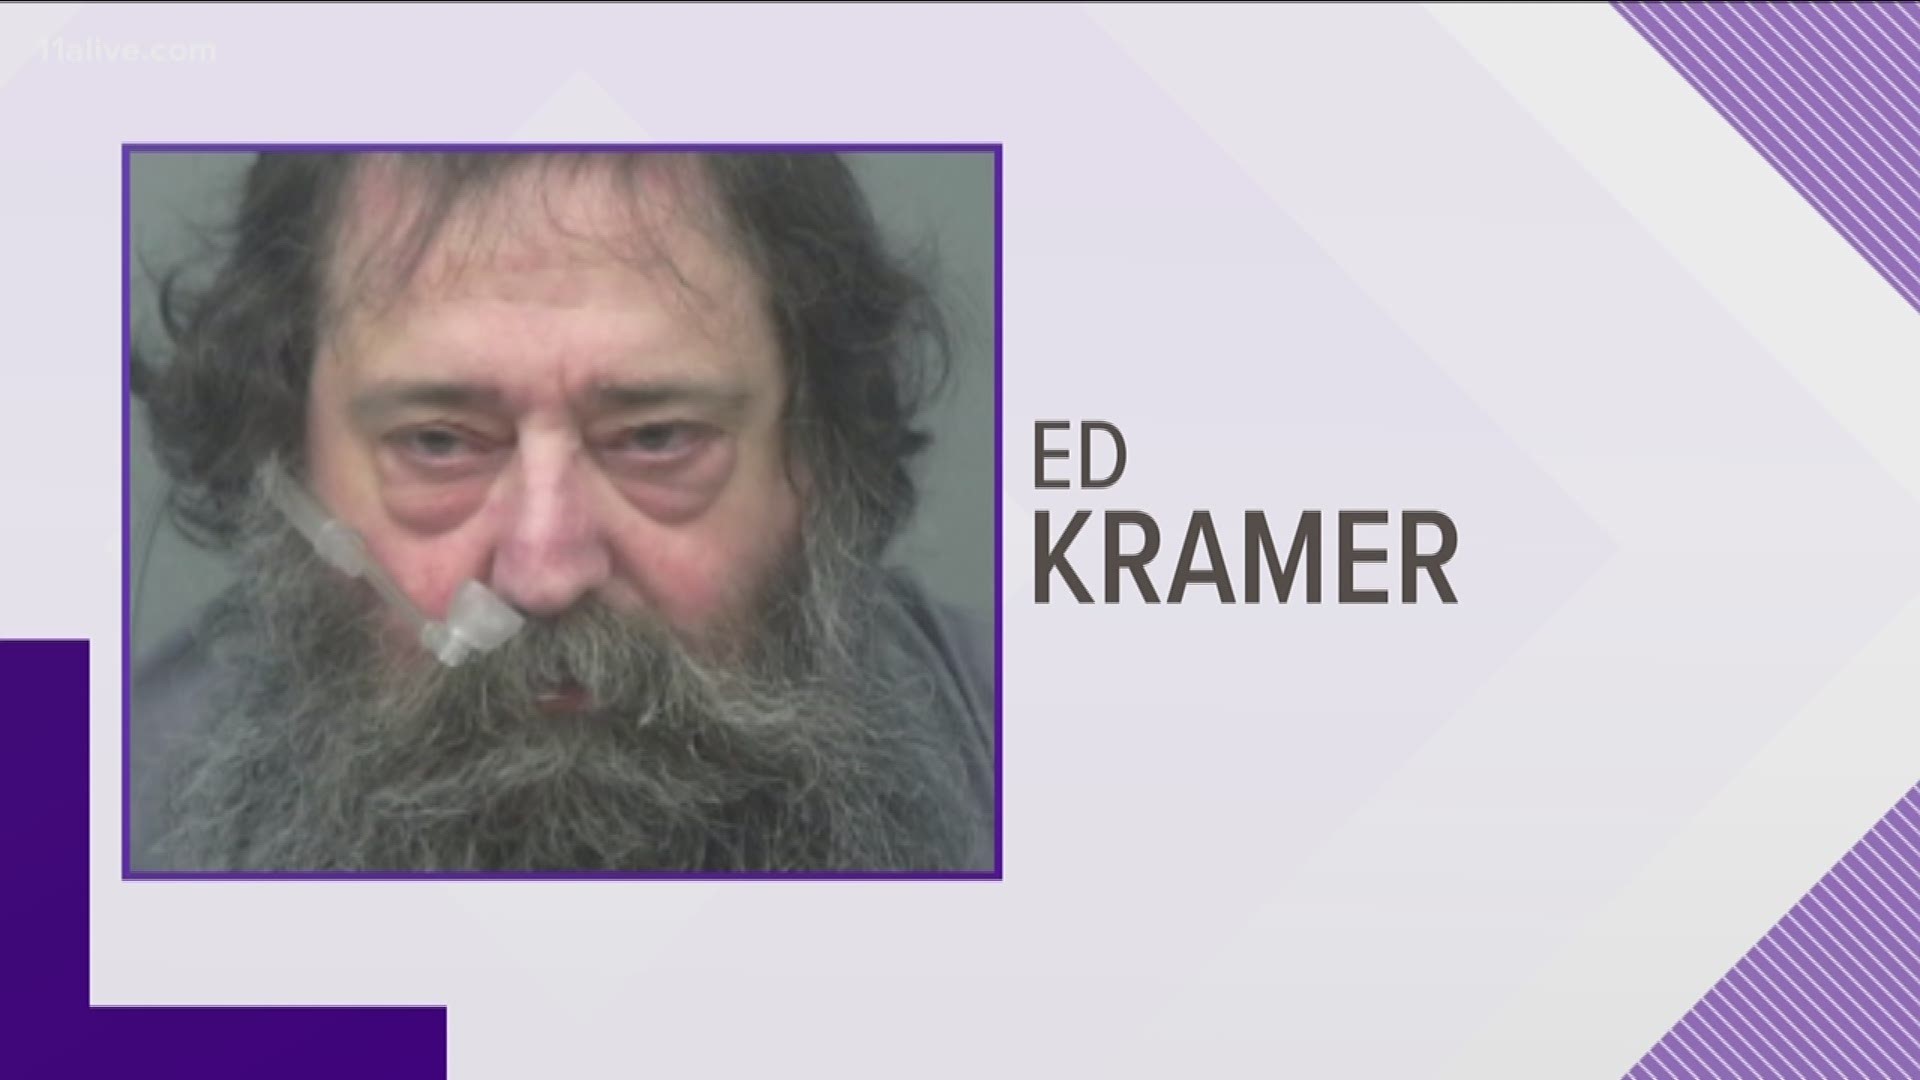 Ed Kramer, DragonCon co-founder, is accused of taking photos of a child at a doctor's office.